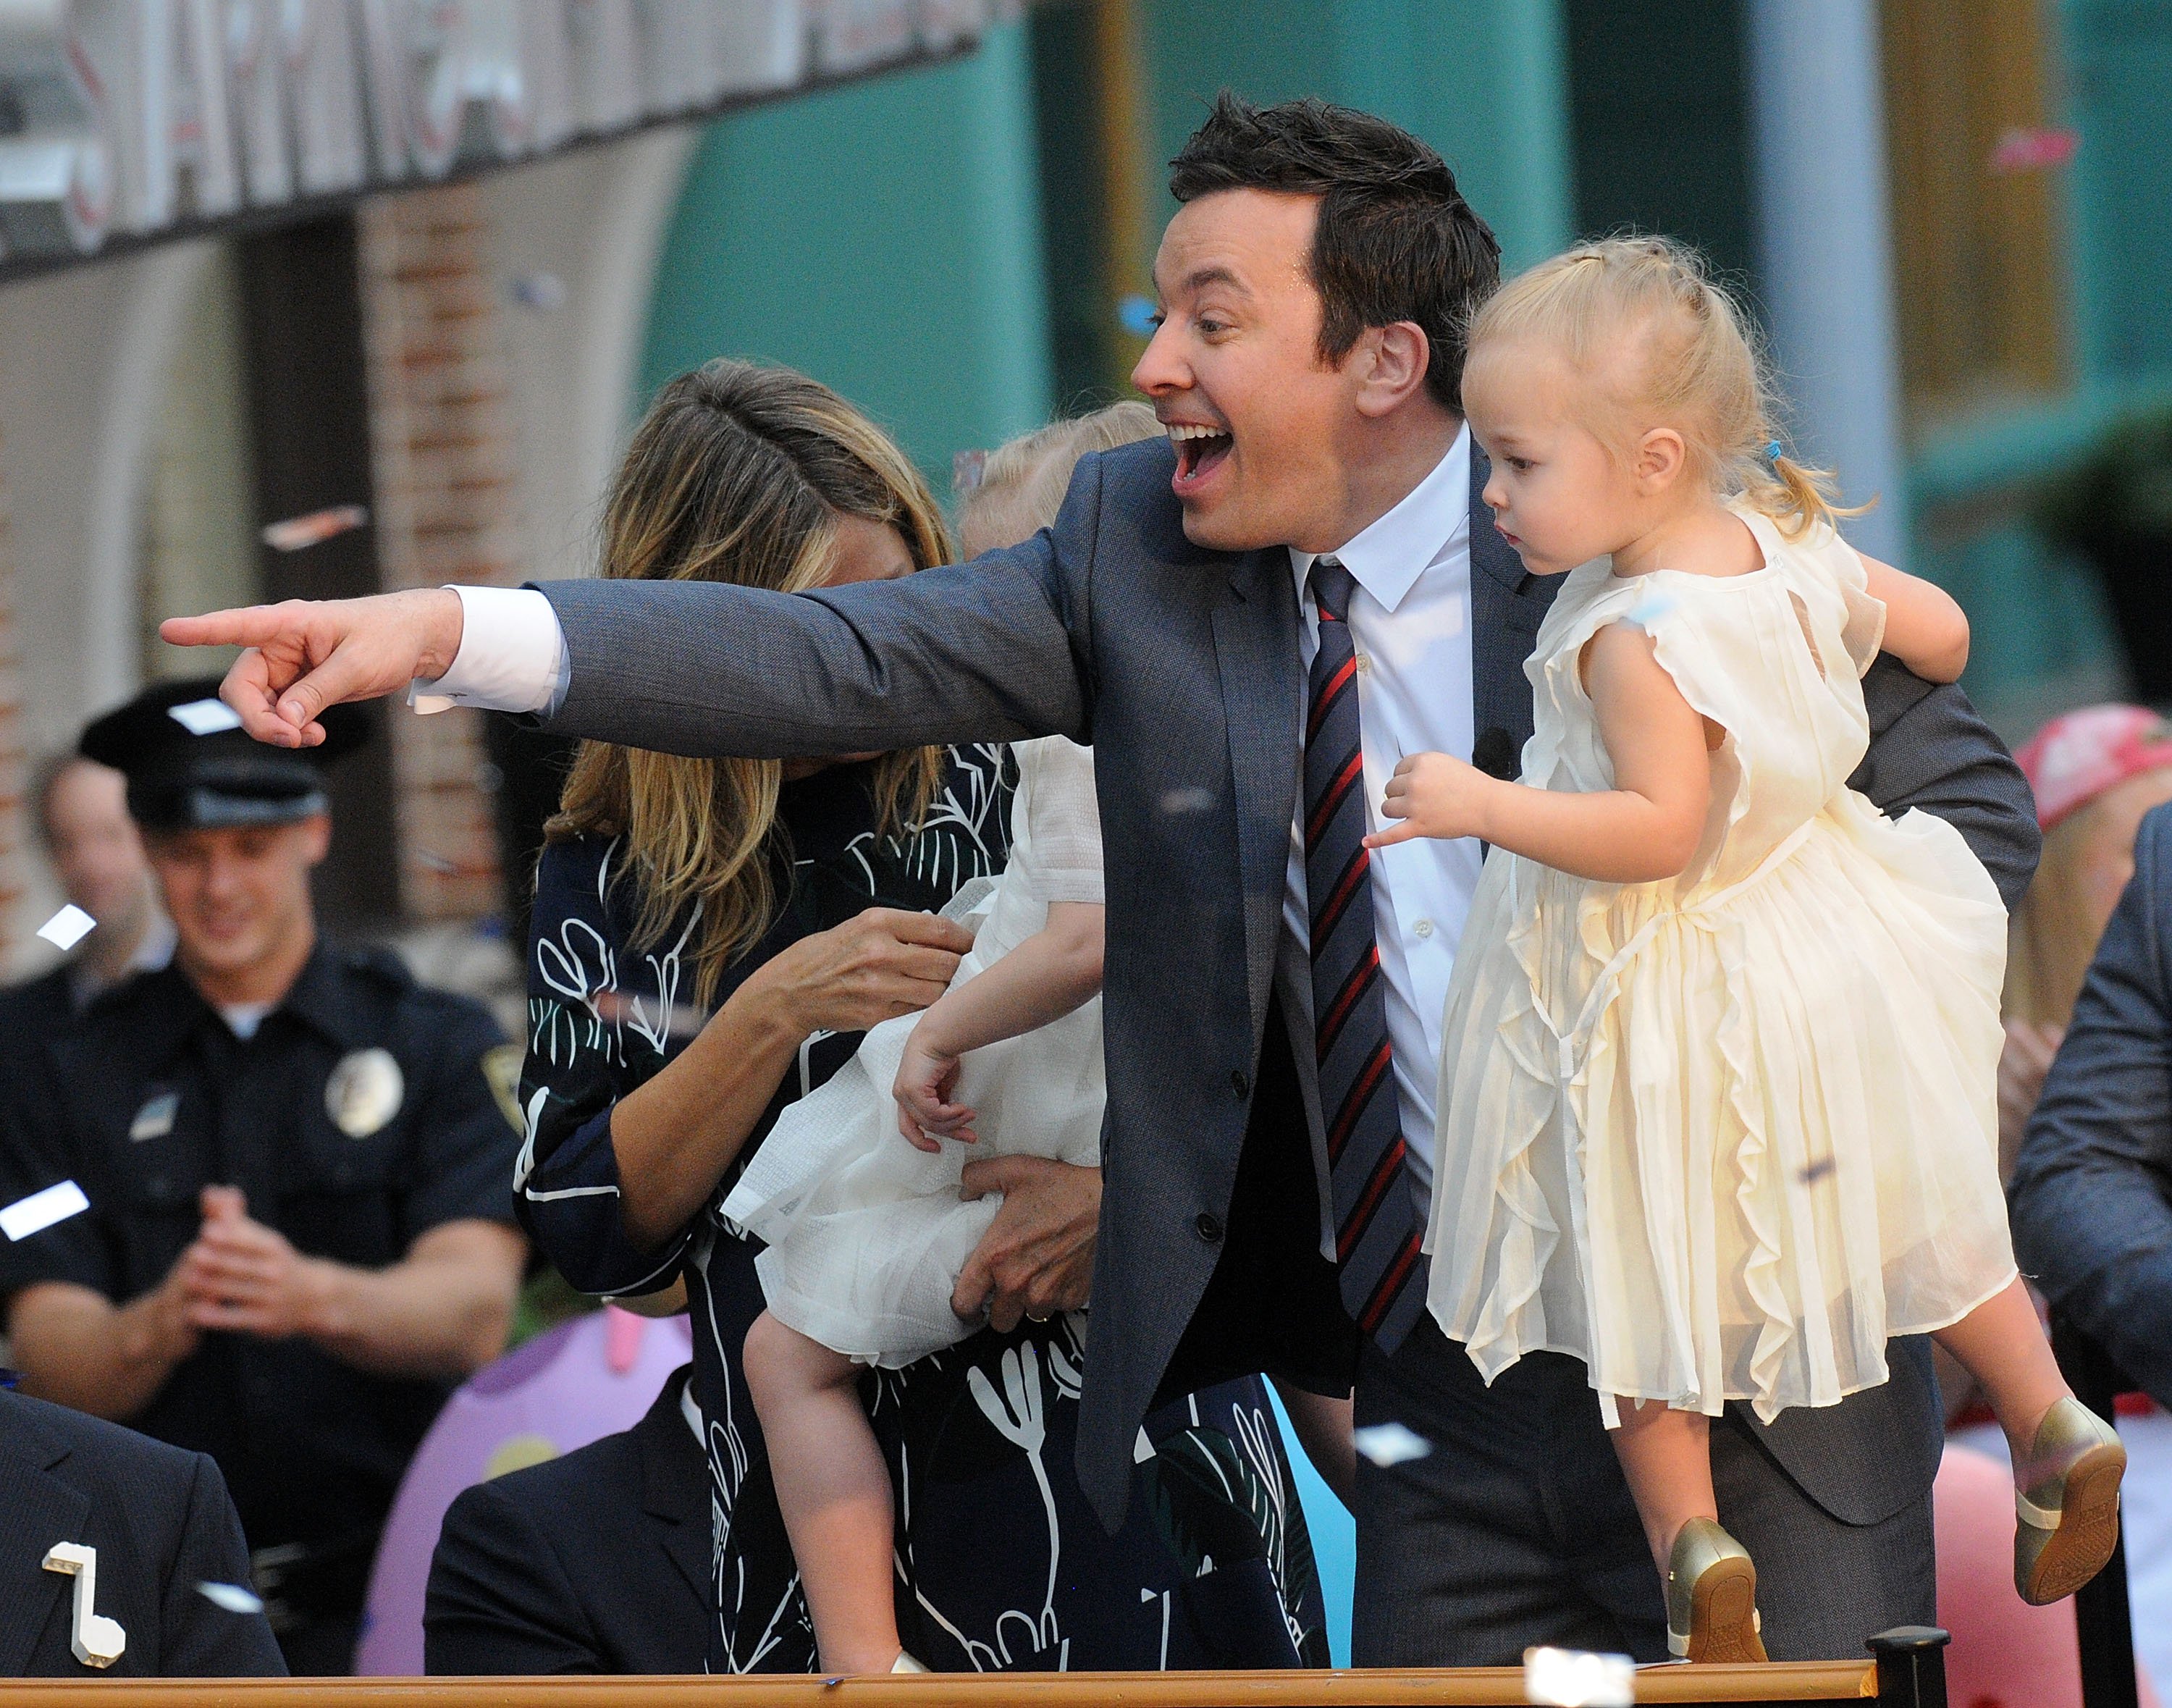 Jimmy Fallon and his daughter, Frances, are pictured greeting the audience during the Grand Opening of Universal Orlando's Newest Attraction "Race Through New York Starring Jimmy Fallon" at Universal Orlando on April 6, 2017, in Orlando, Florida | Source: Getty Images